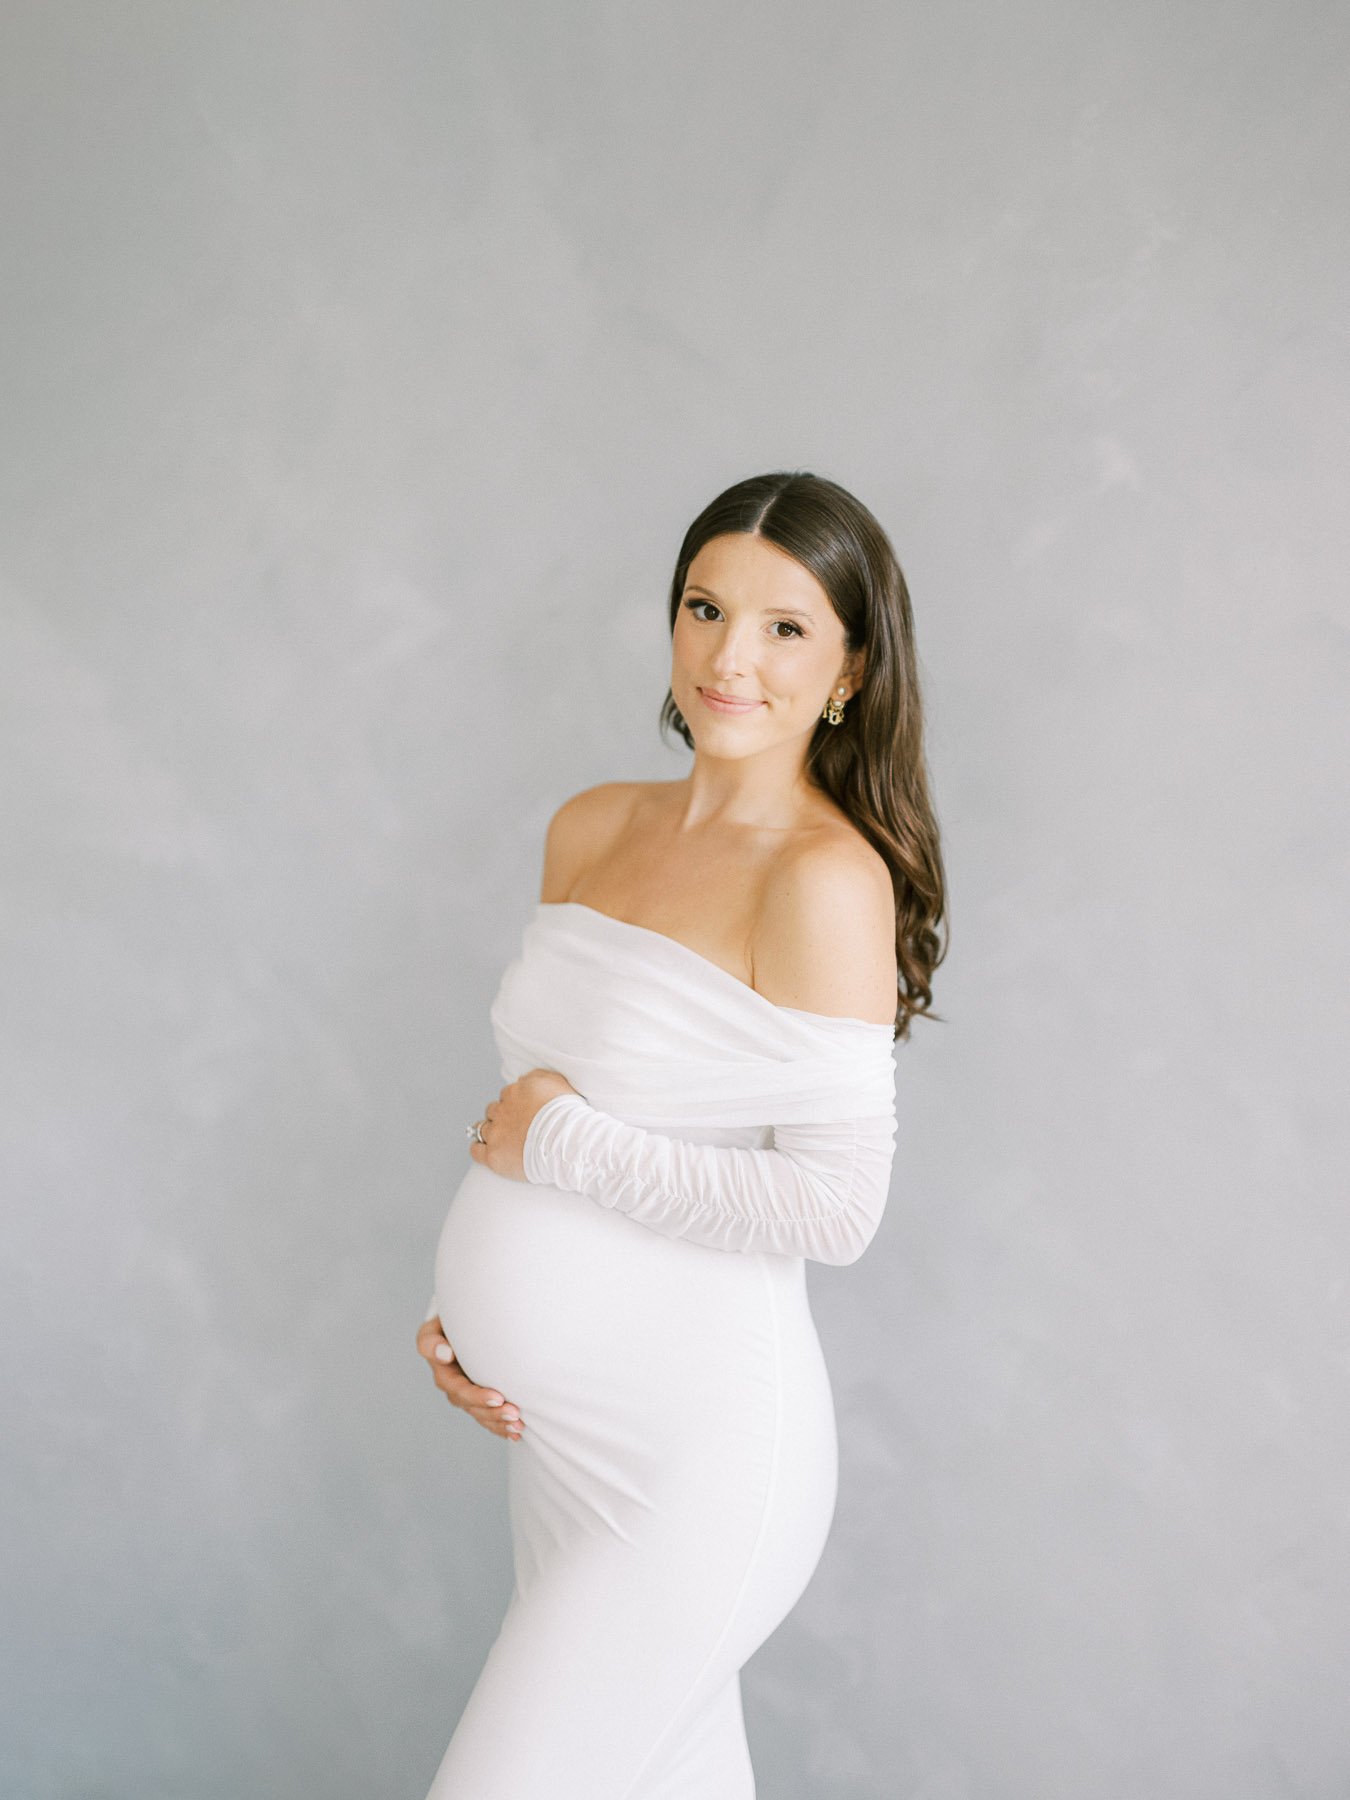 Simeone Maternity by Michelle Lange Photography-23.jpg